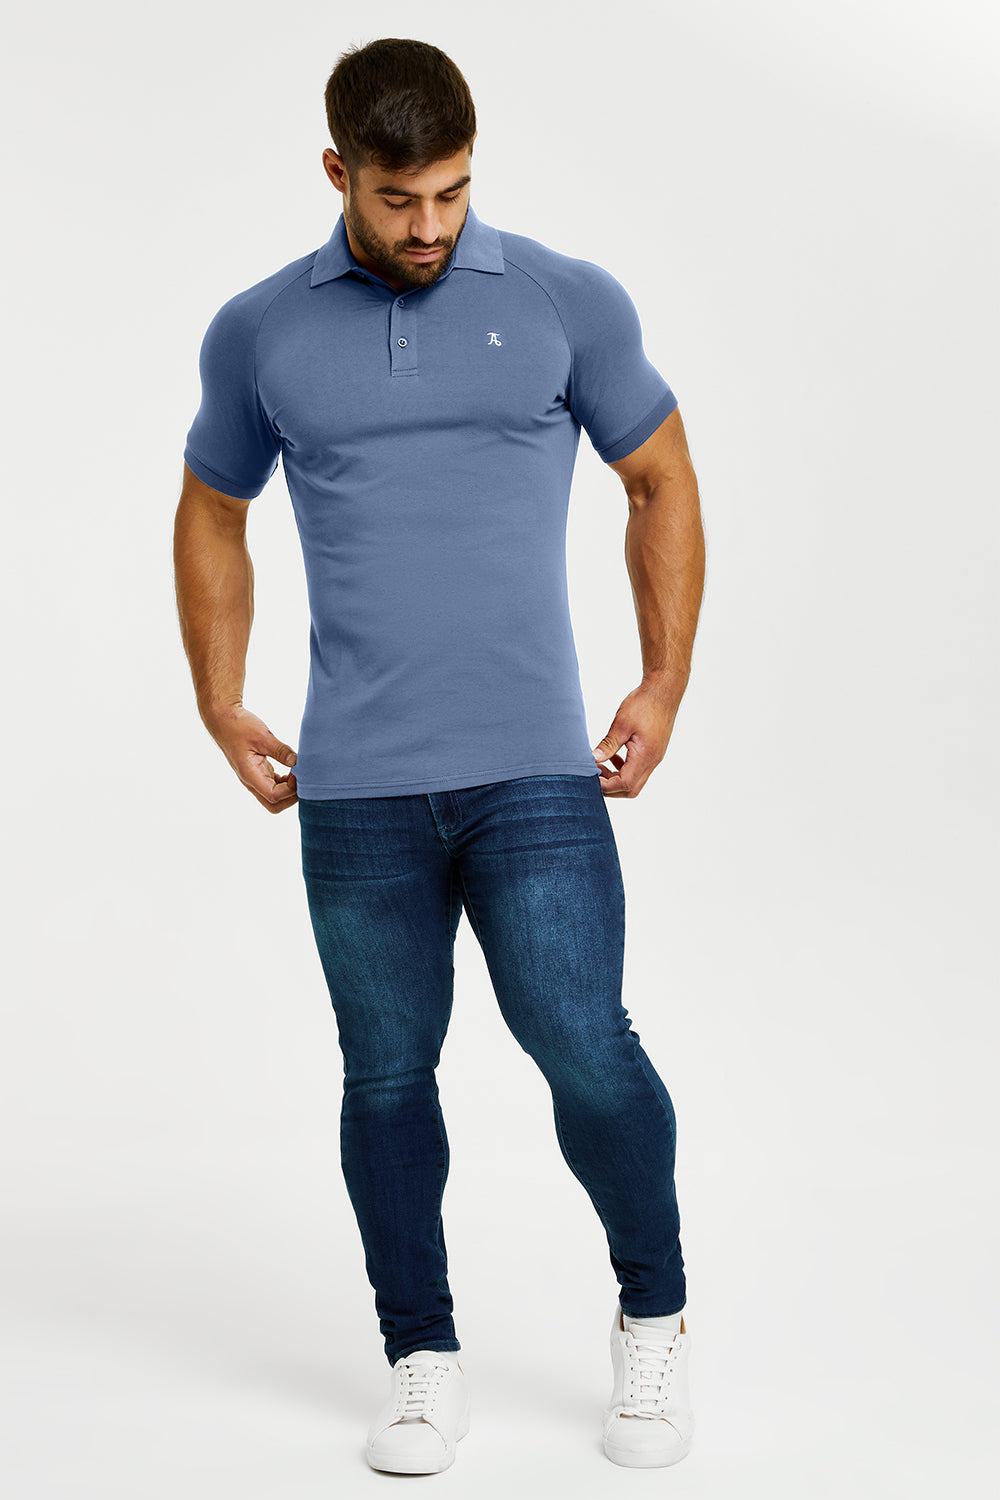 Athletic Fit Polo Shirt in Stone Blue - TAILORED ATHLETE - USA